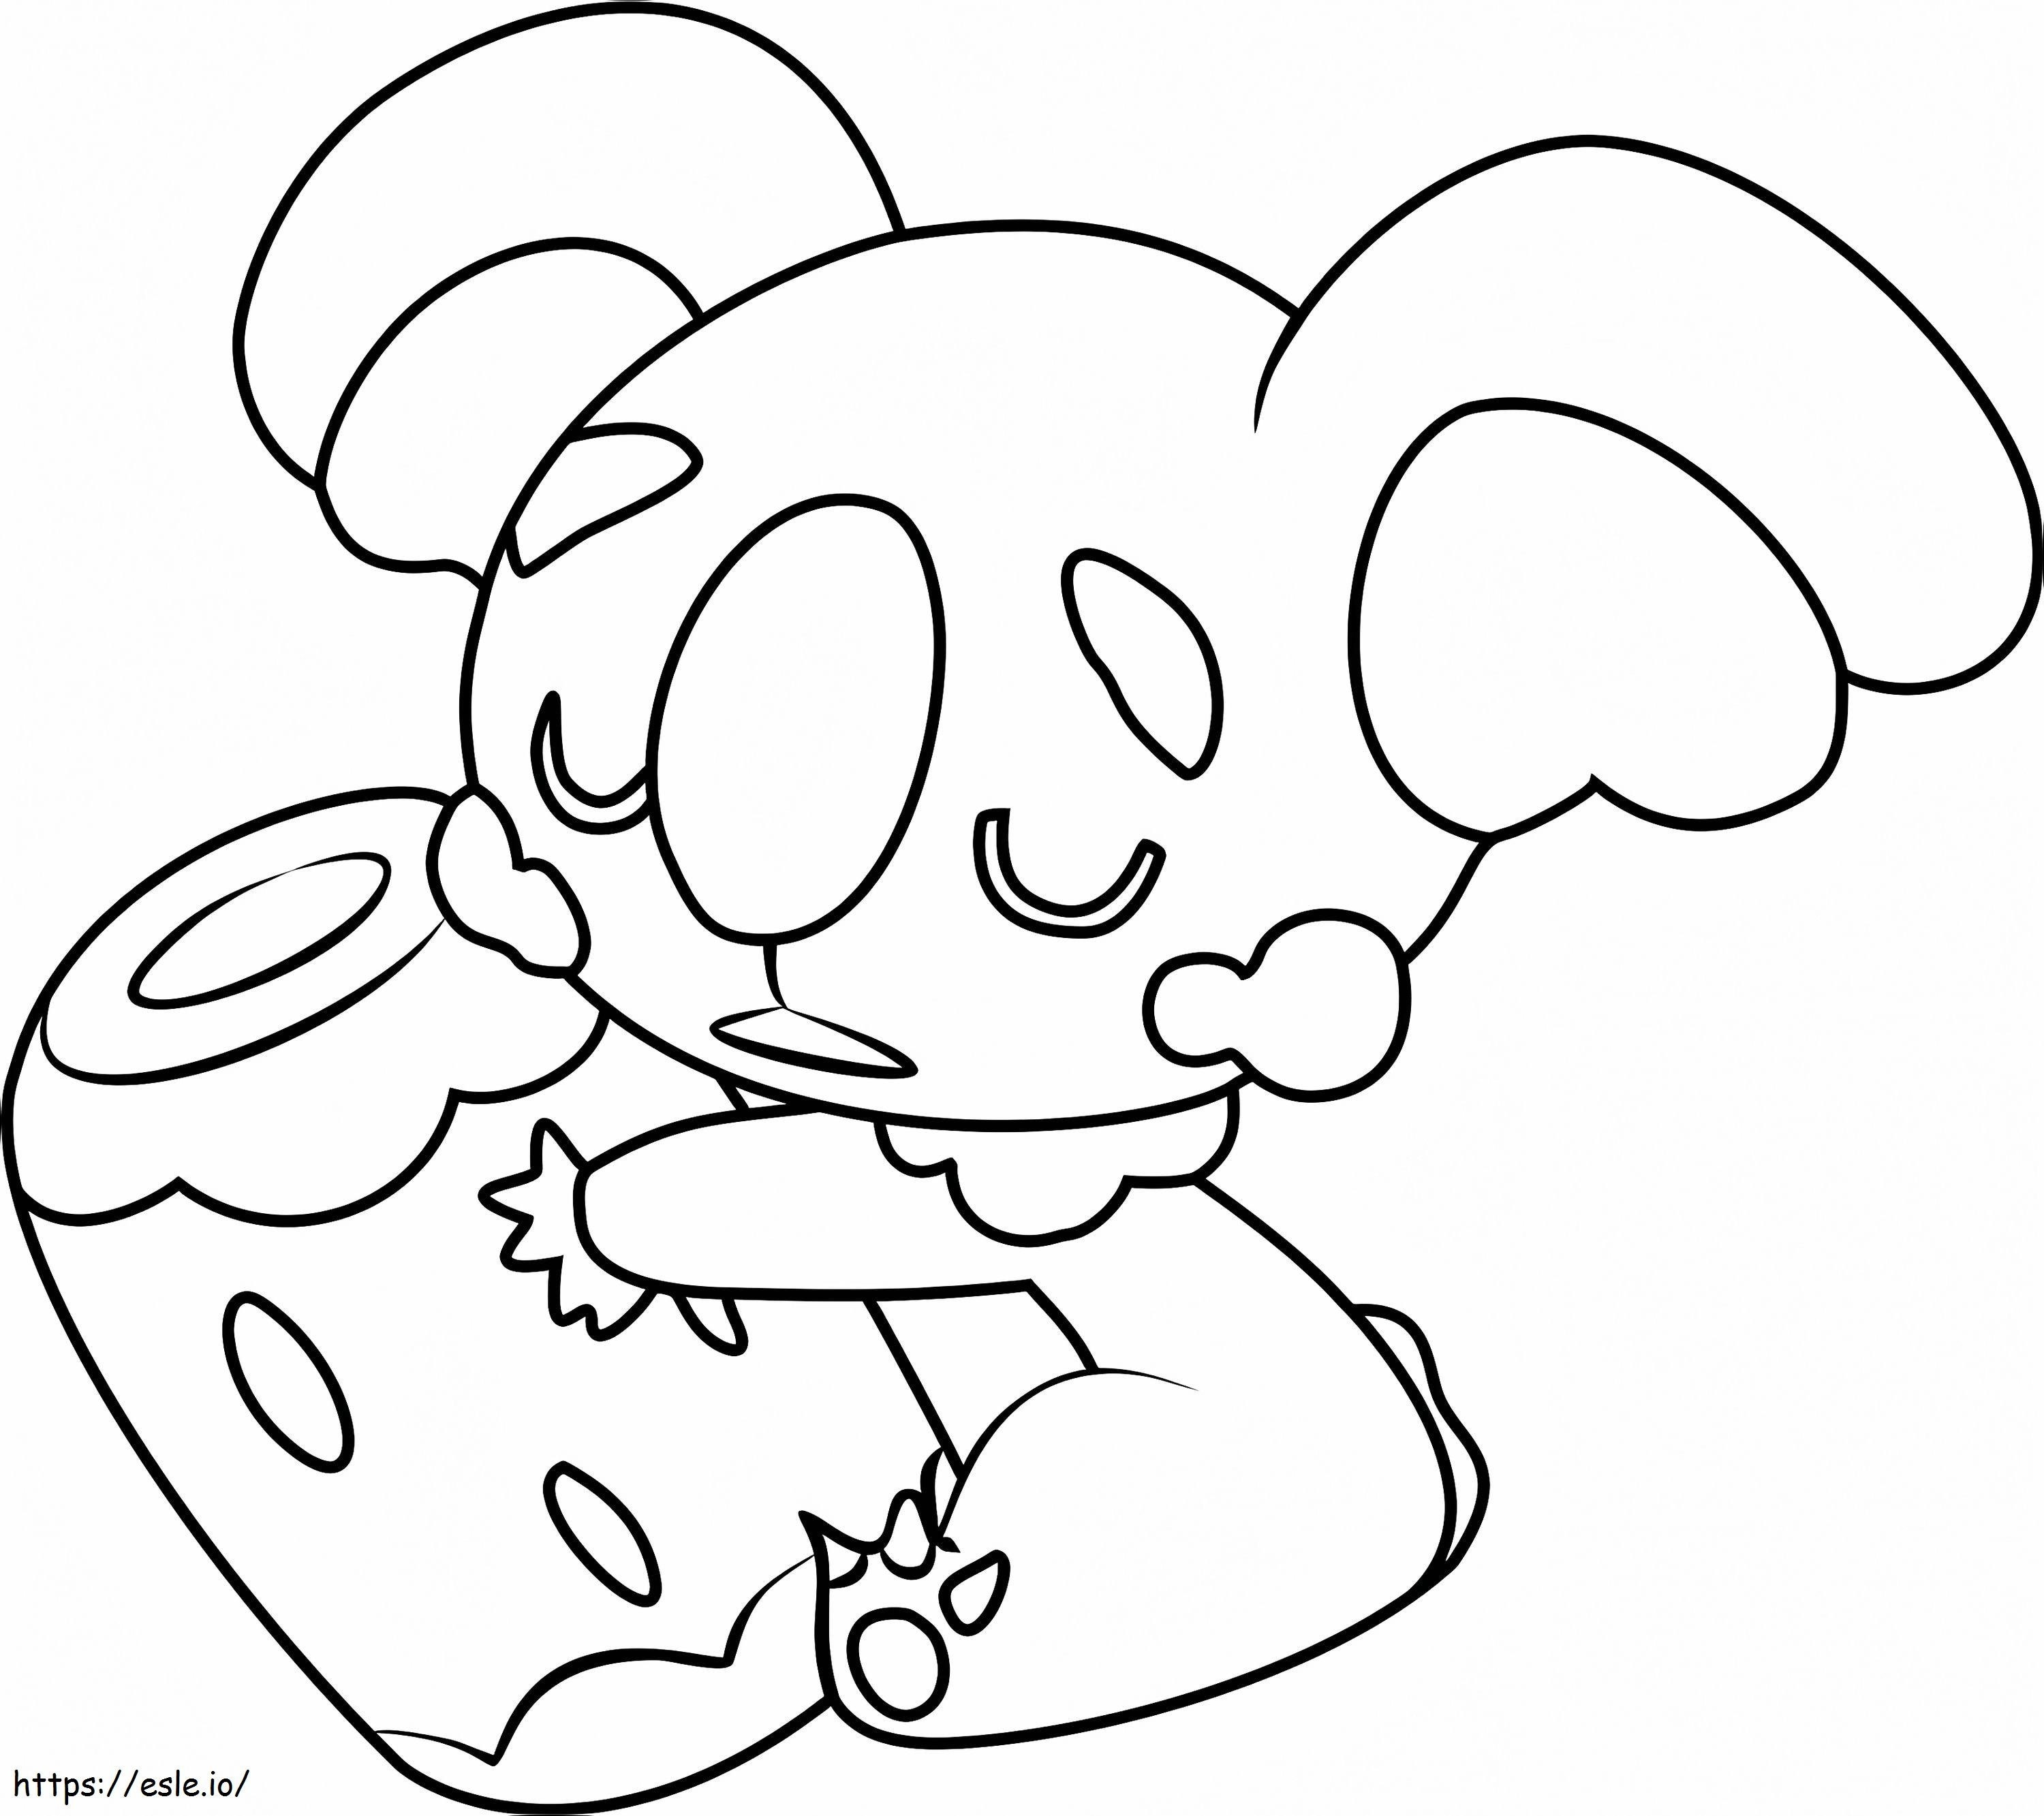 26 coloring page